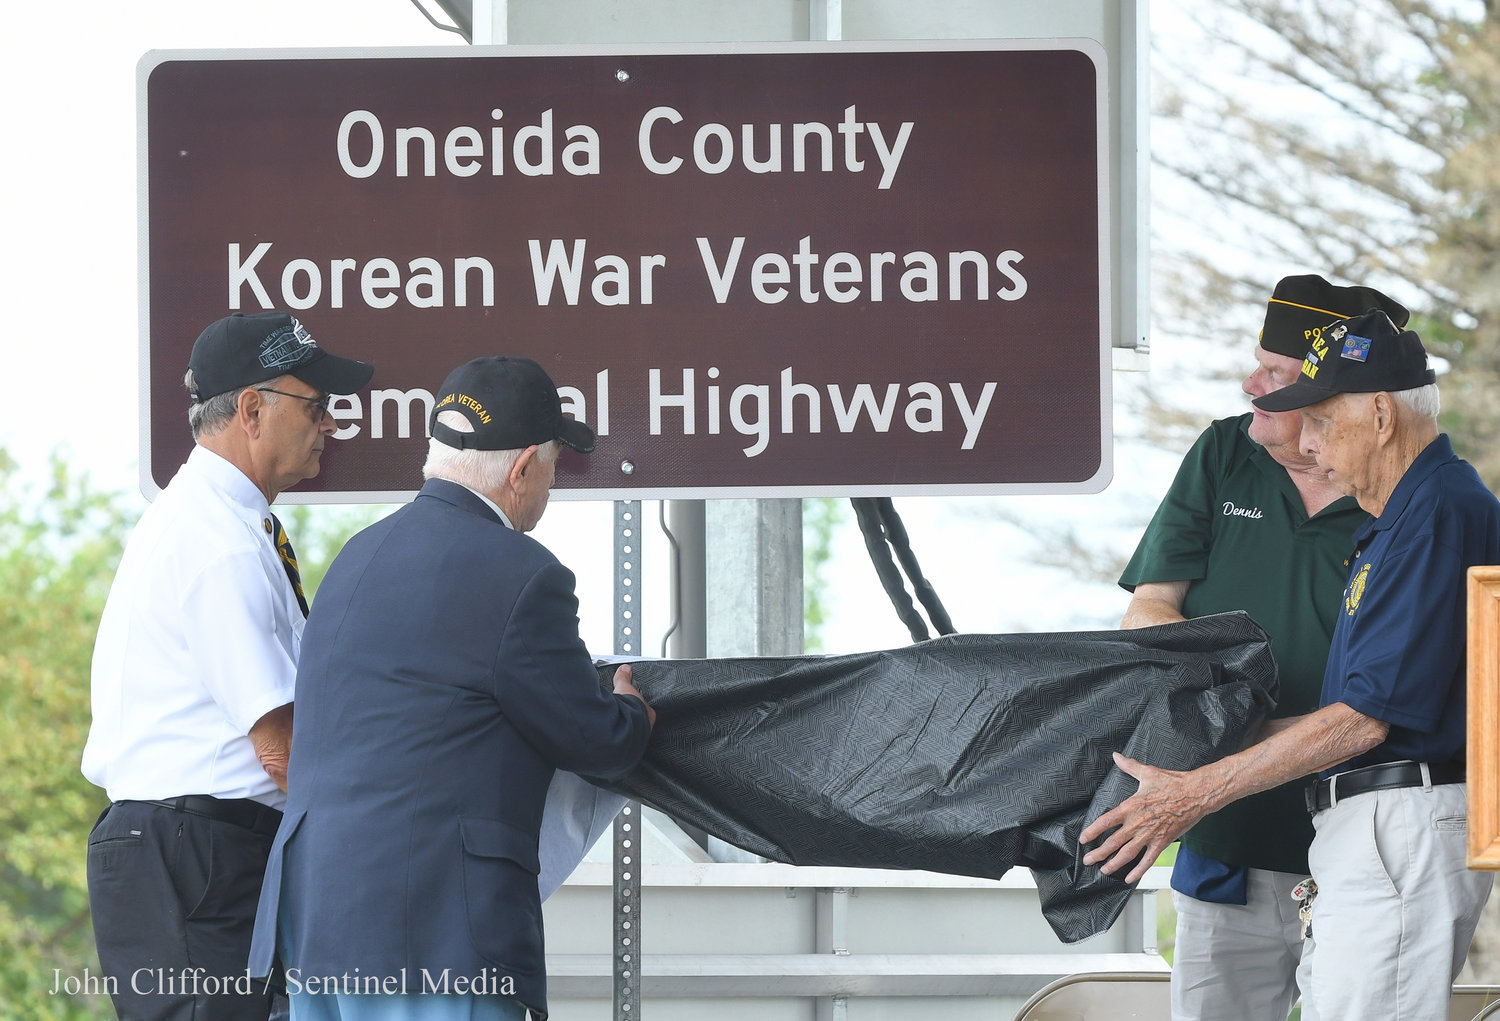 Pictured is the unveiling of the highway marker dedicating State Route 365 as the Oneida County Korean War Veterans Memorial Highway.